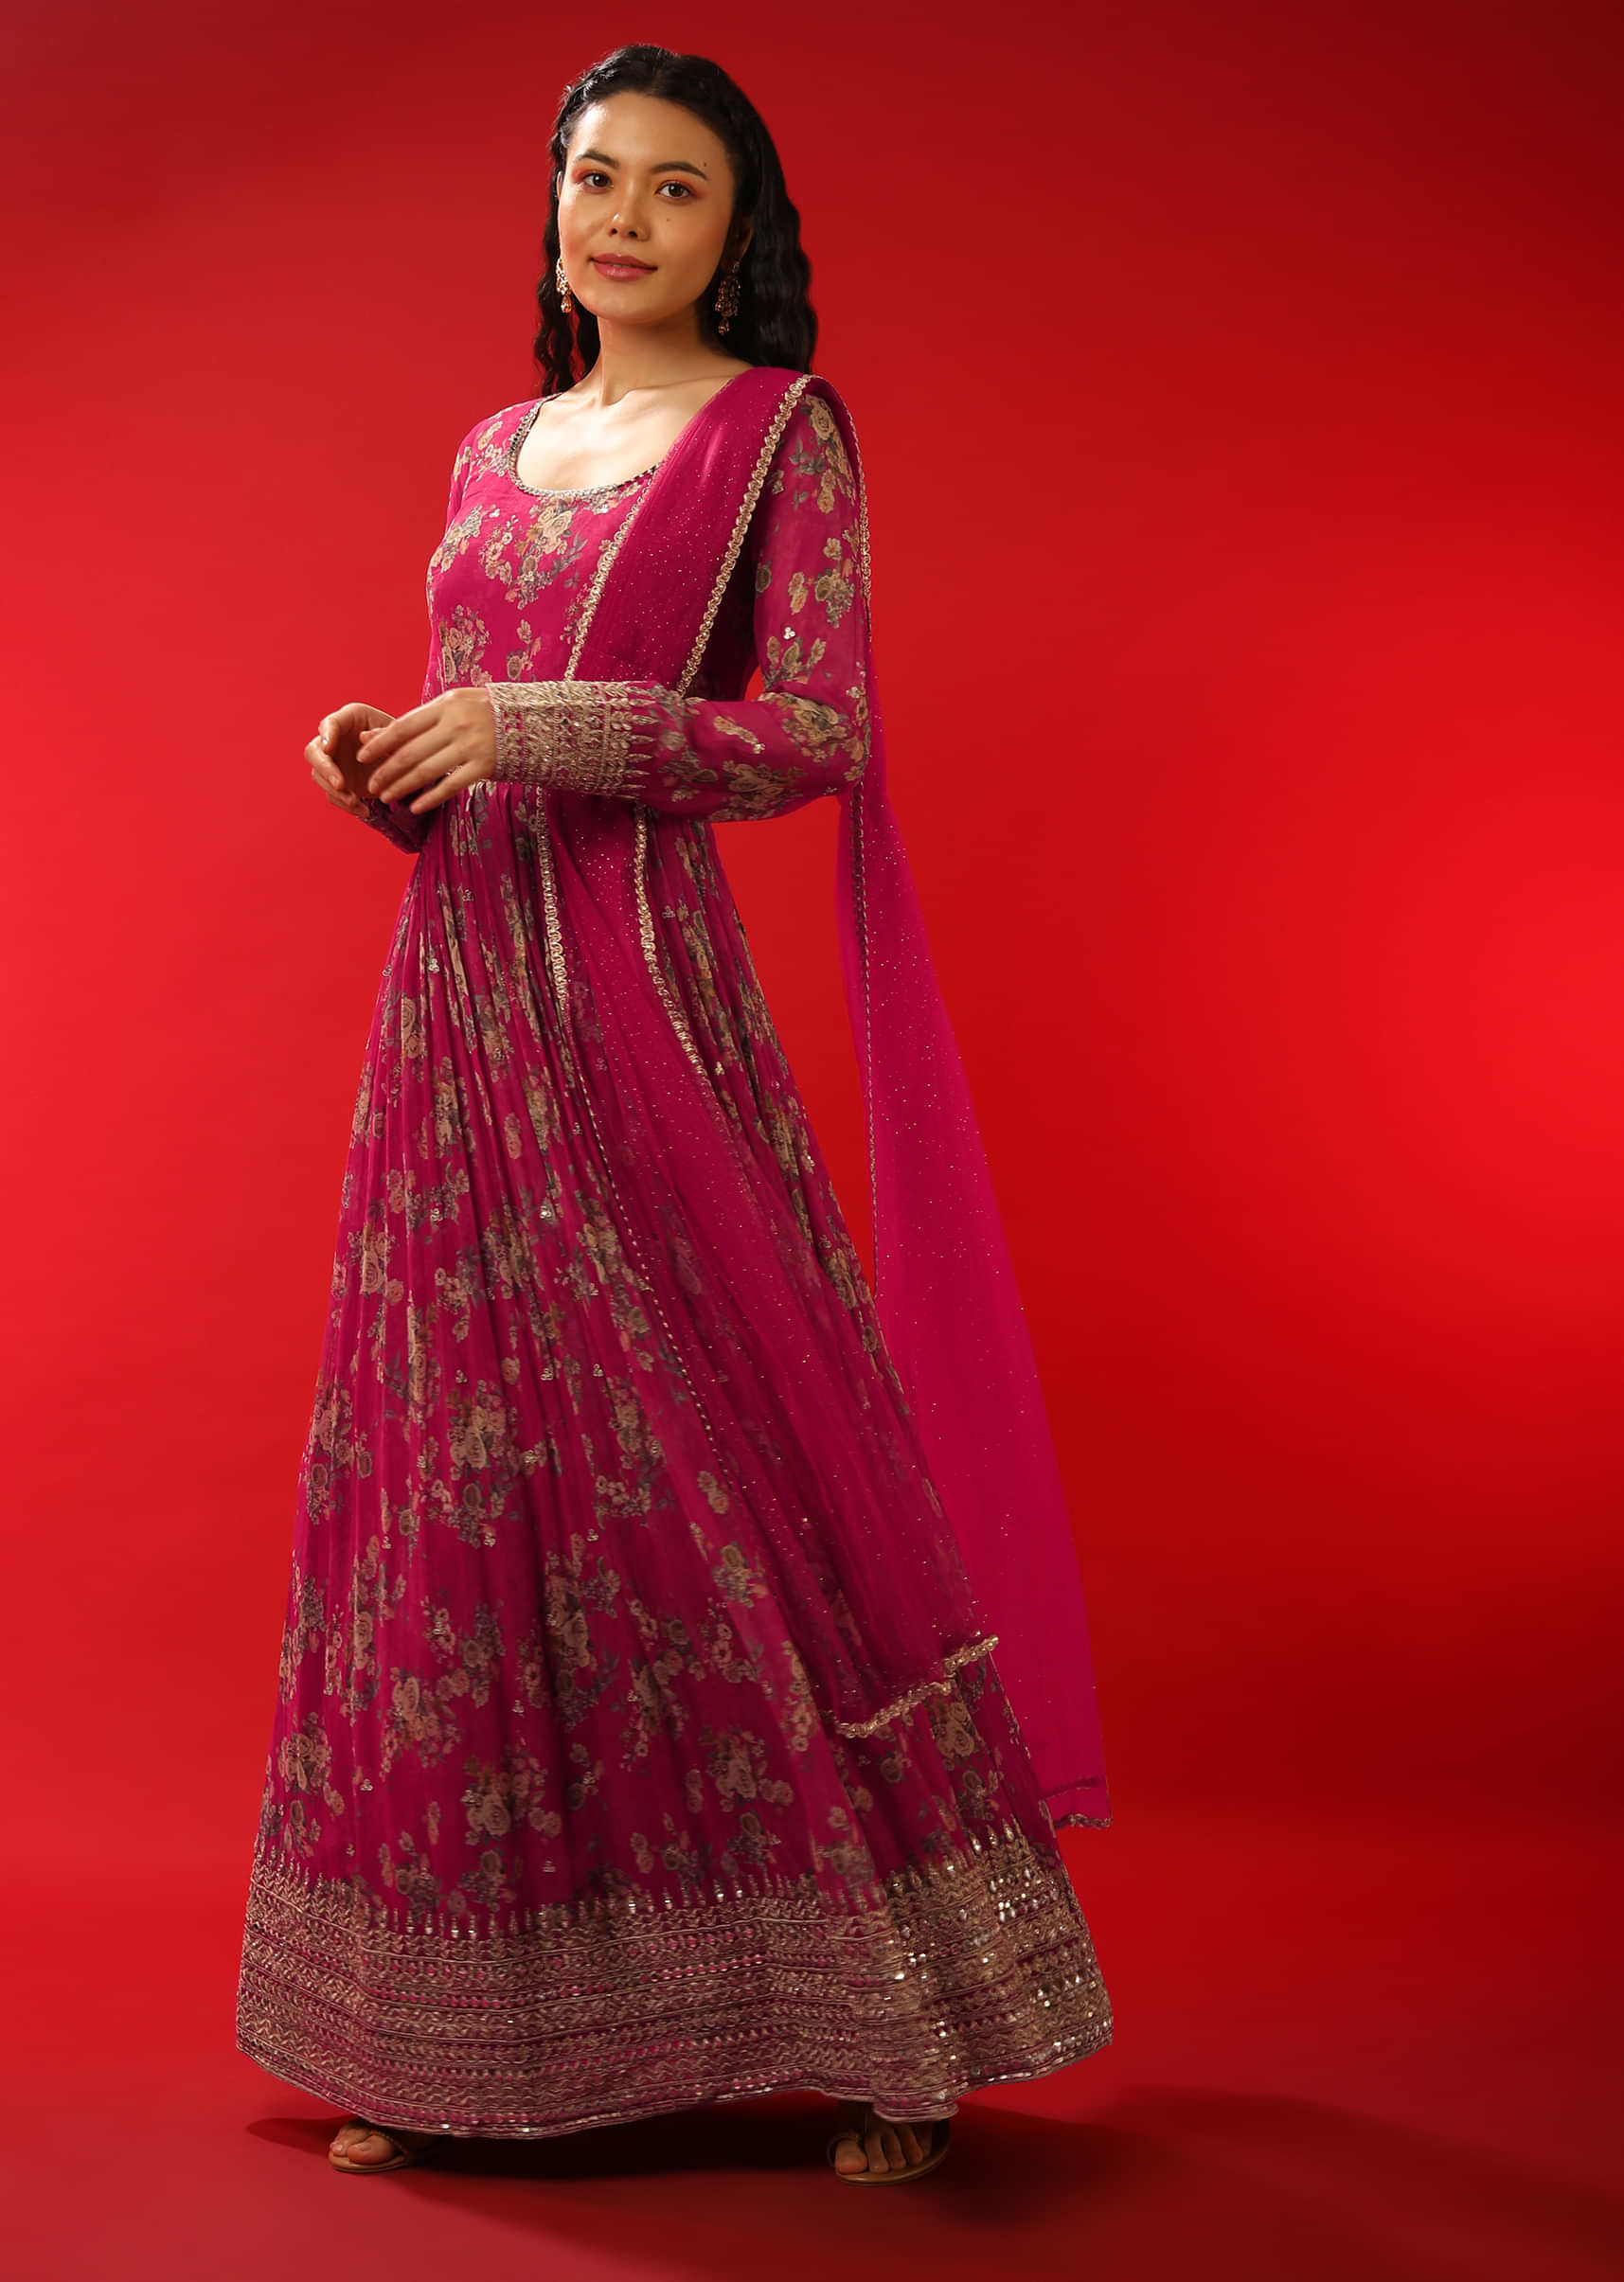 Azalea Pink Anarkali Suit In Georgette With Floral Print And Zari Work